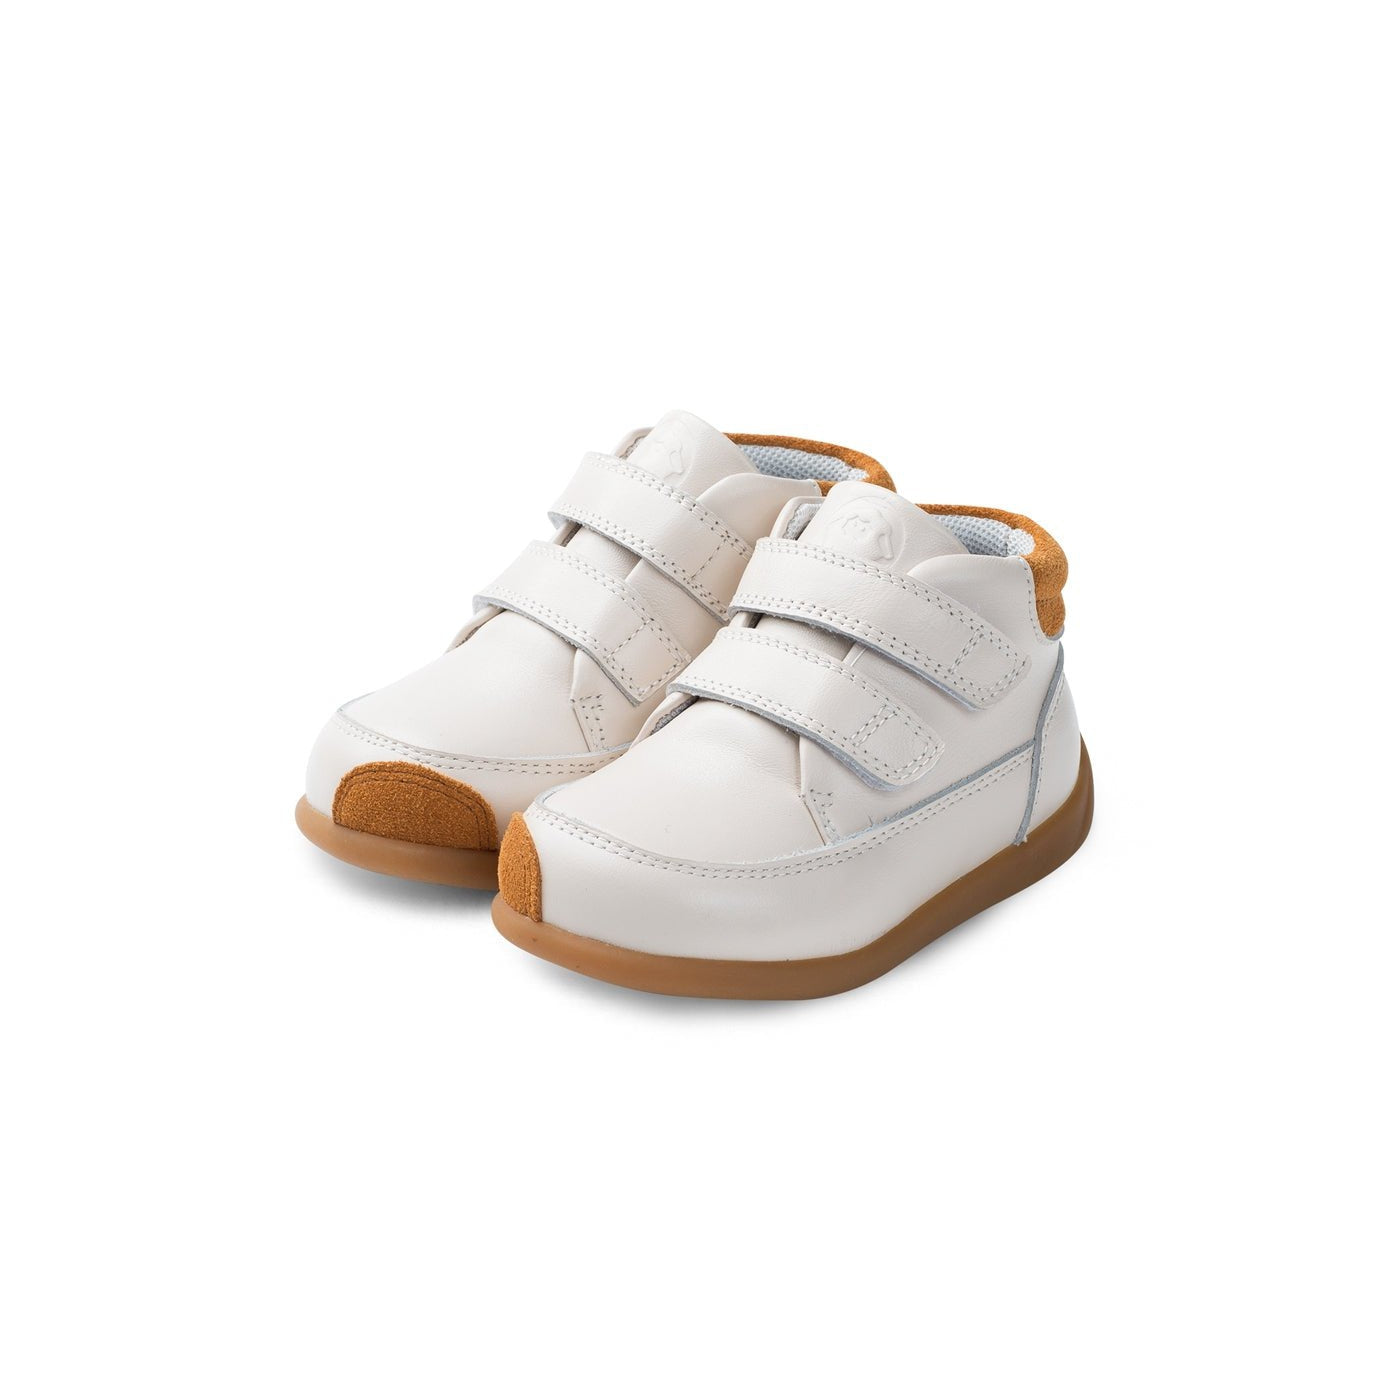 Patch Mark Soft Sole Pre-walker Cream Baby Mid-top Sneakers - 0cm